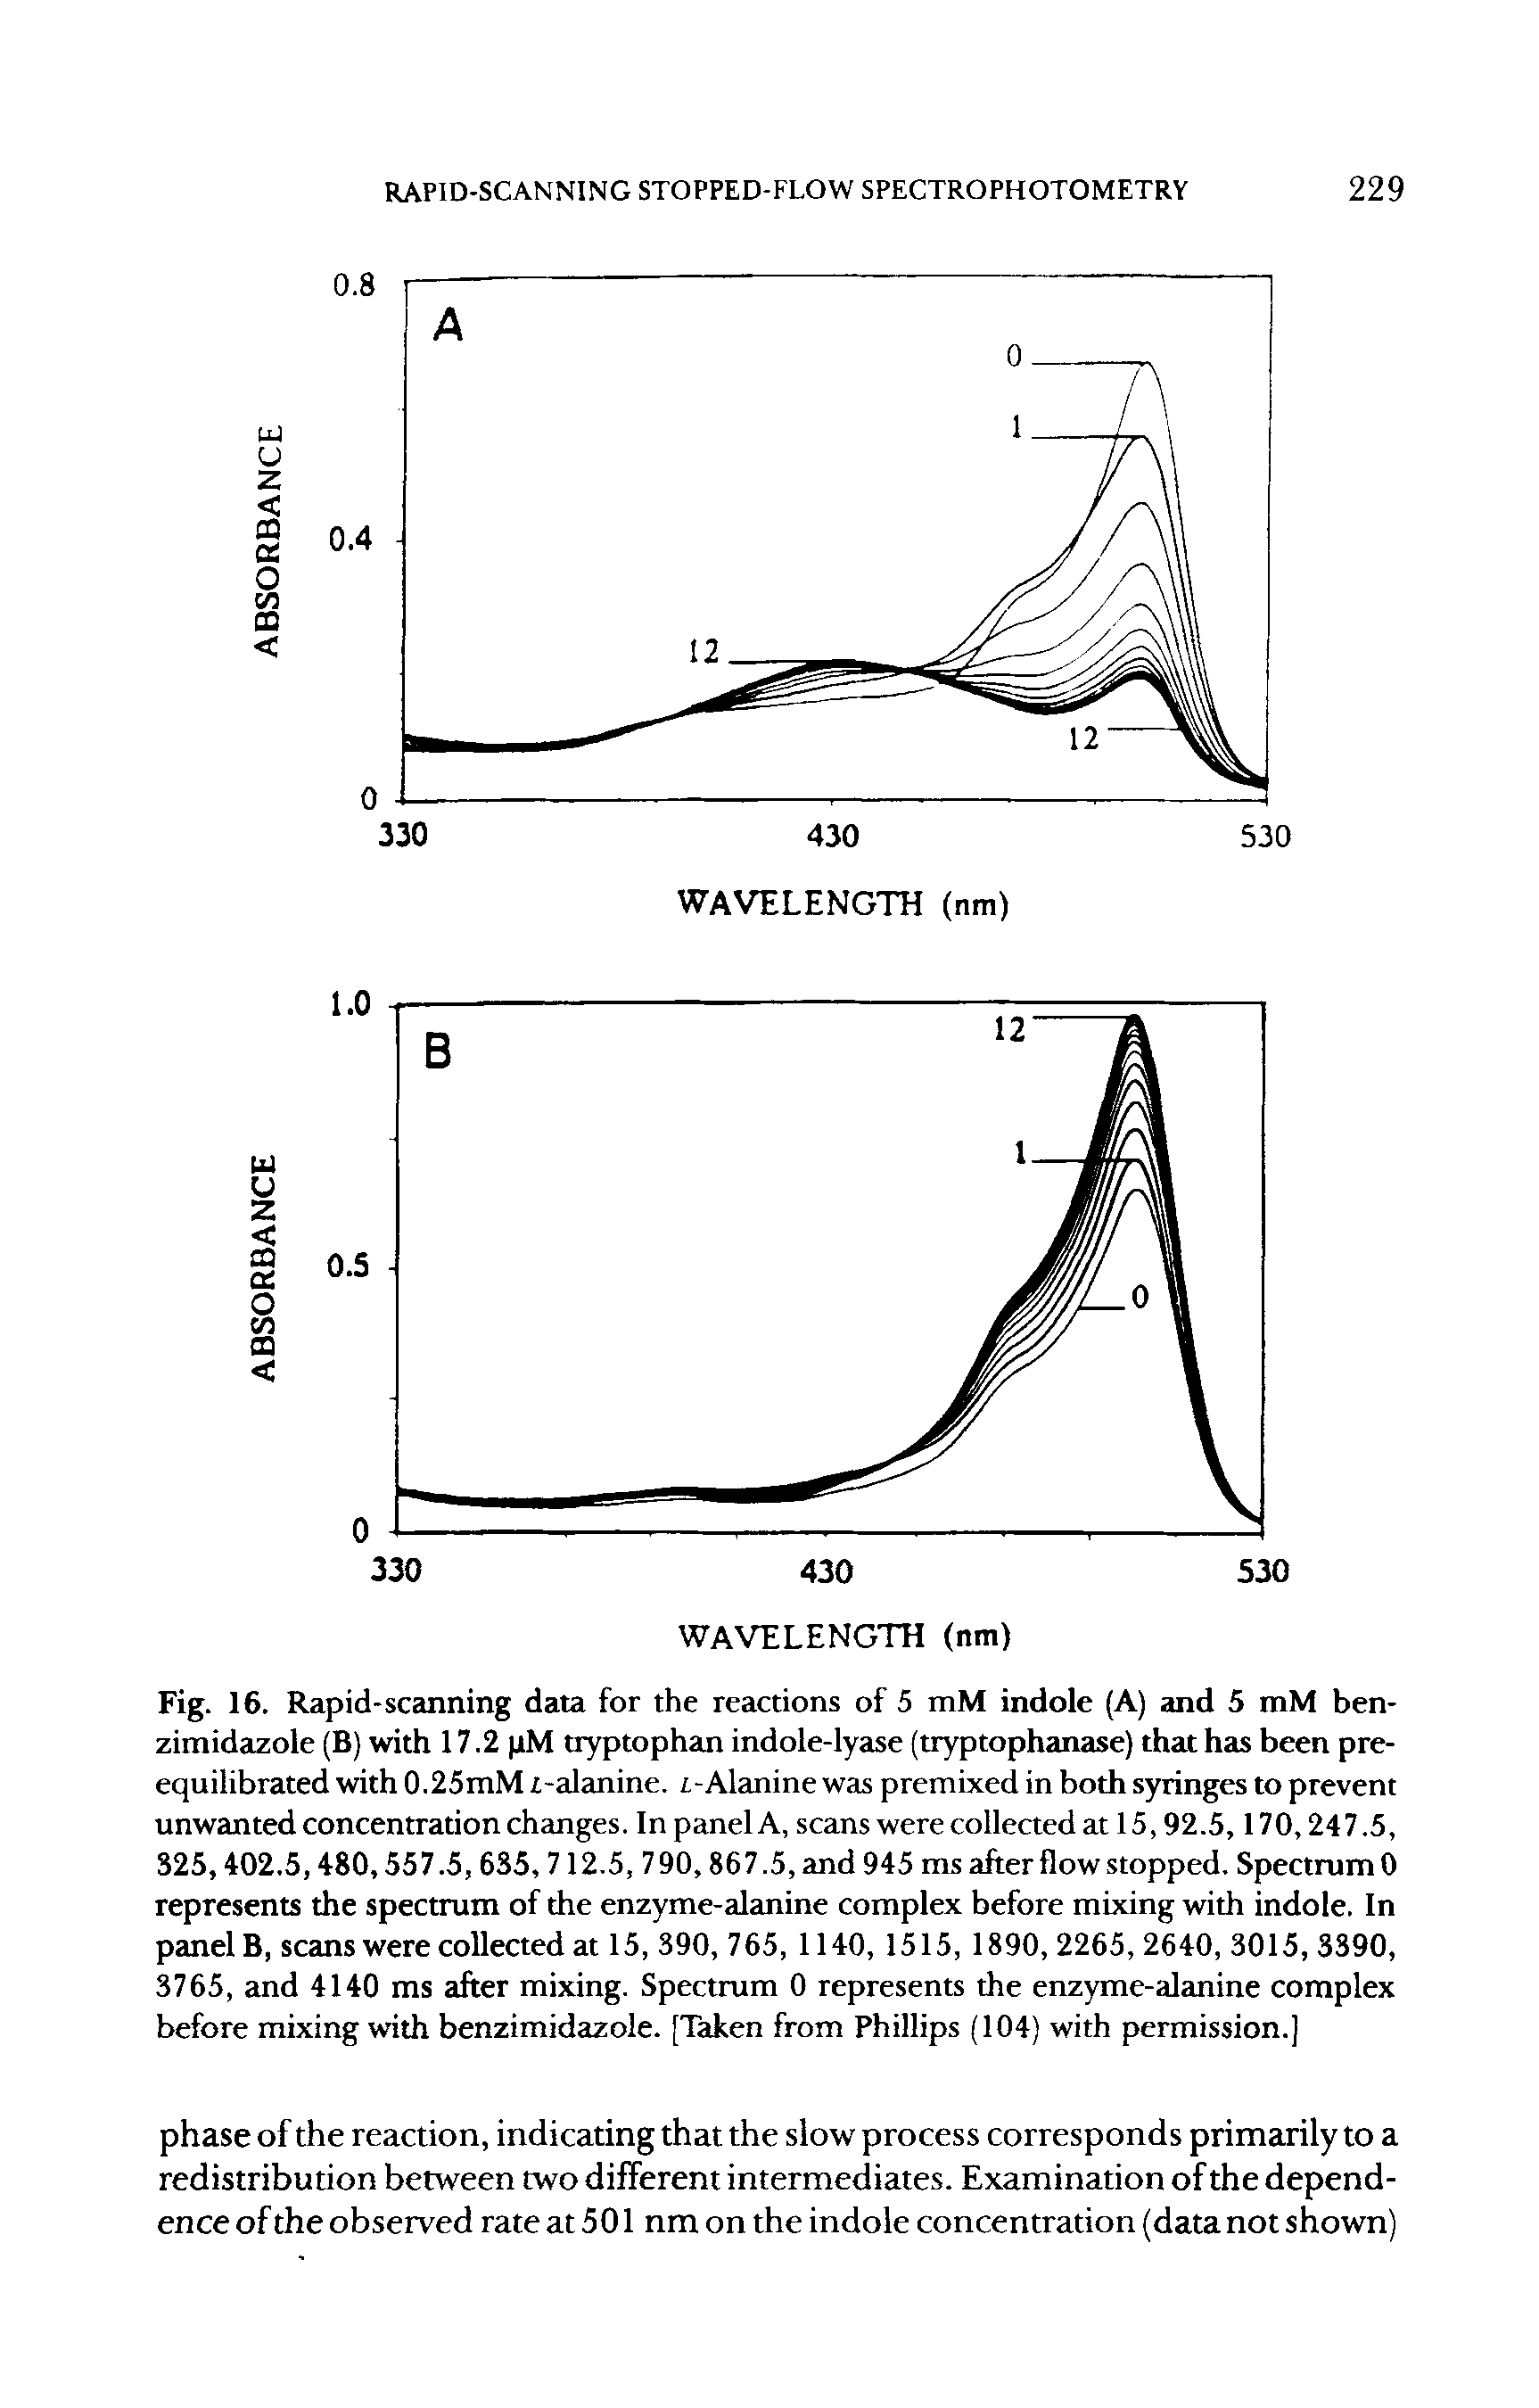 Fig. 16. Rapid-scanning data for the reactions of 5 mM indole (A) and 5 mM benzimidazole (B) with 17.2 iM tryptophan indole-lyase (tryptophanase) that has been preequilibrated with 0.25mM t-alanine. i-Alanine was premixed in both syringes to prevent unwanted concentration changes. In panel A, scans were collected at 15,92.5,170,247.5, 325,402.5,480,557.5, 635, 712.5, 790,867.5, and 945 ms after flow stopped. Spectrum 0 represents the spectrum of the enzyme-alanine complex before mixing with indole. In panel B, scans were collected at 15, 390, 765, 1140, 1515, 1890, 2265,2640, 3015,3390, 3765, and 4140 ms after mixing. Spectrum 0 represents the enzyme-alanine complex before mixing with benzimidazole. [Taken from Phillips (104) with permission.]...